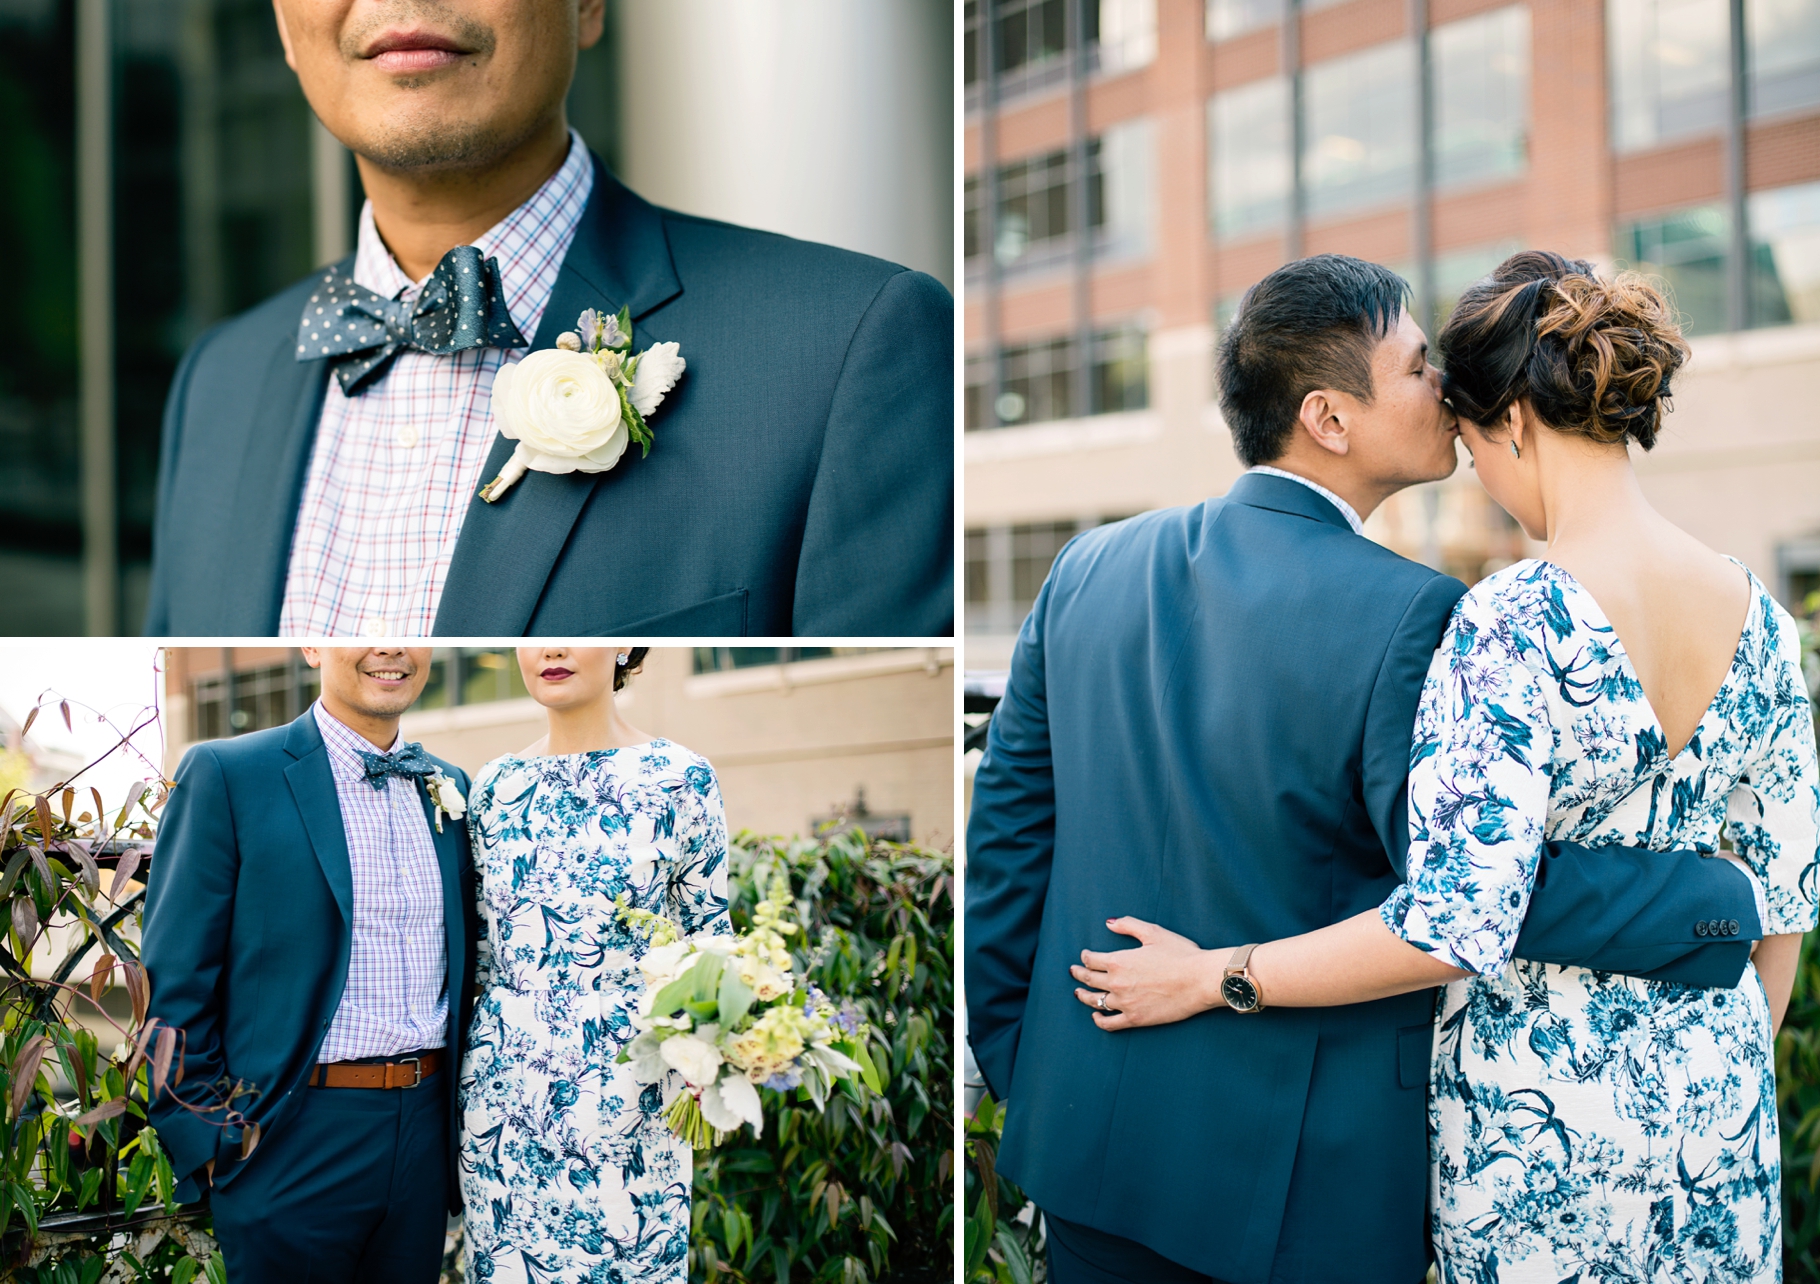 11-Bride-Groom-boutonniere-King-Street-Staion-Pioneer-Square-Seattle-Wedding-Day-Photographer-Photography-by-Betty-Elaine